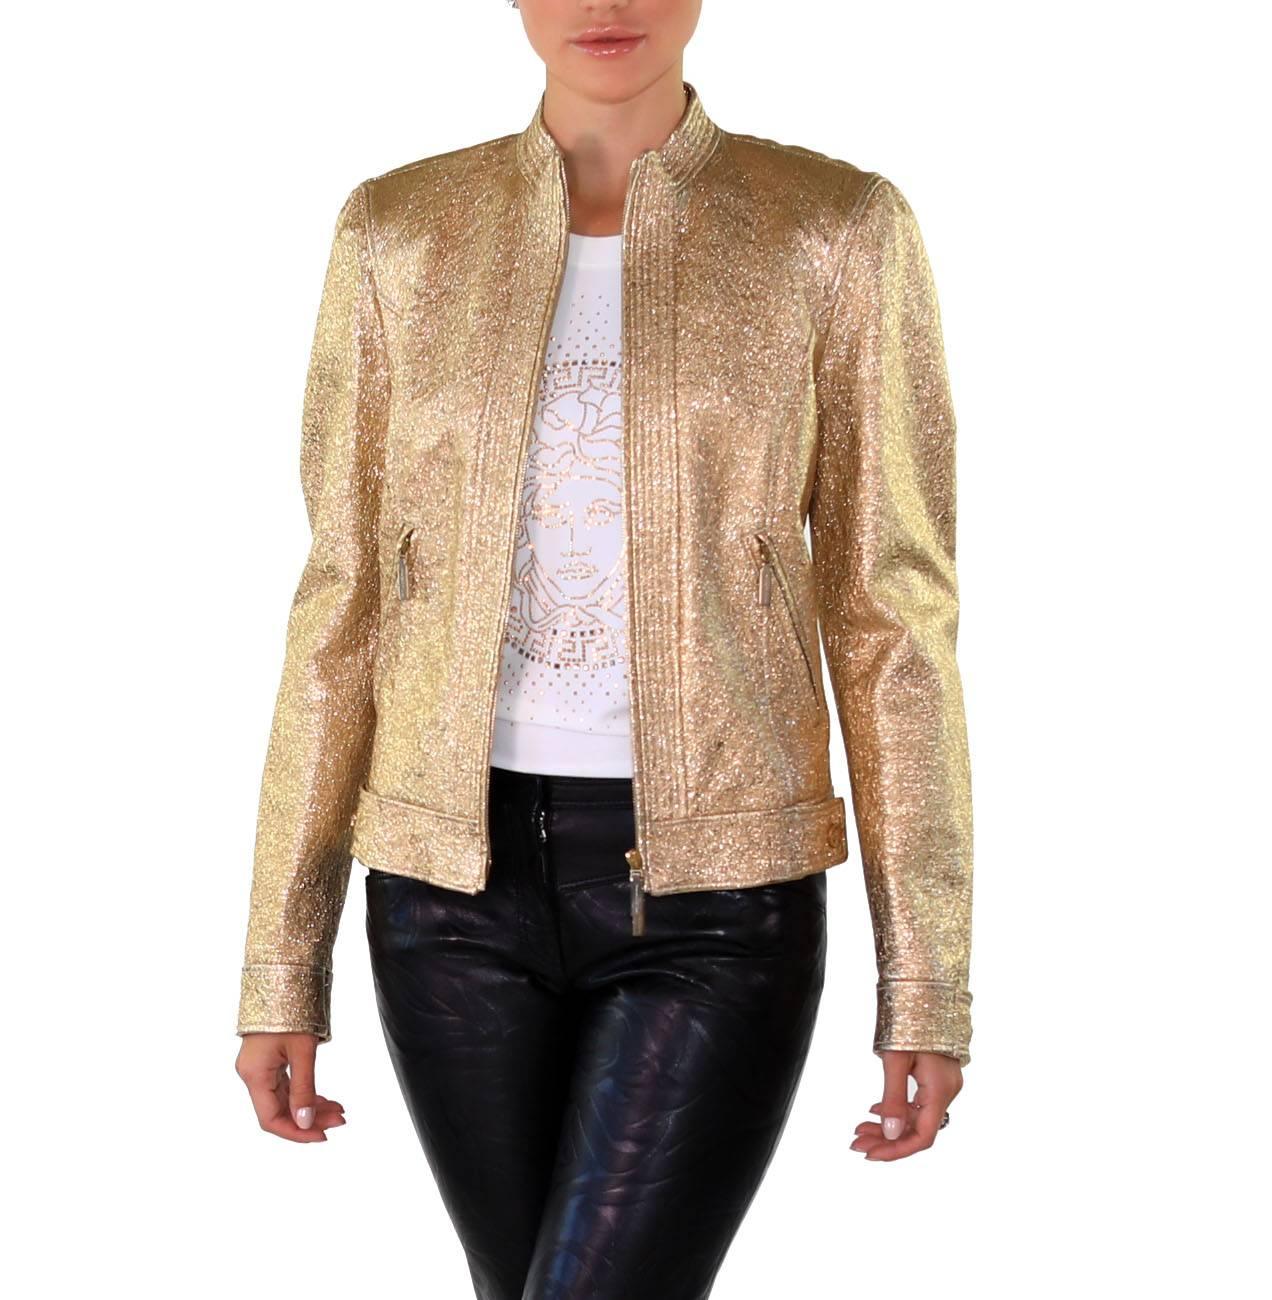 NEW VERSACE GOLD METALLIC TEXTURED LEATHER JACKET Sz 40 - 4 For Sale 2